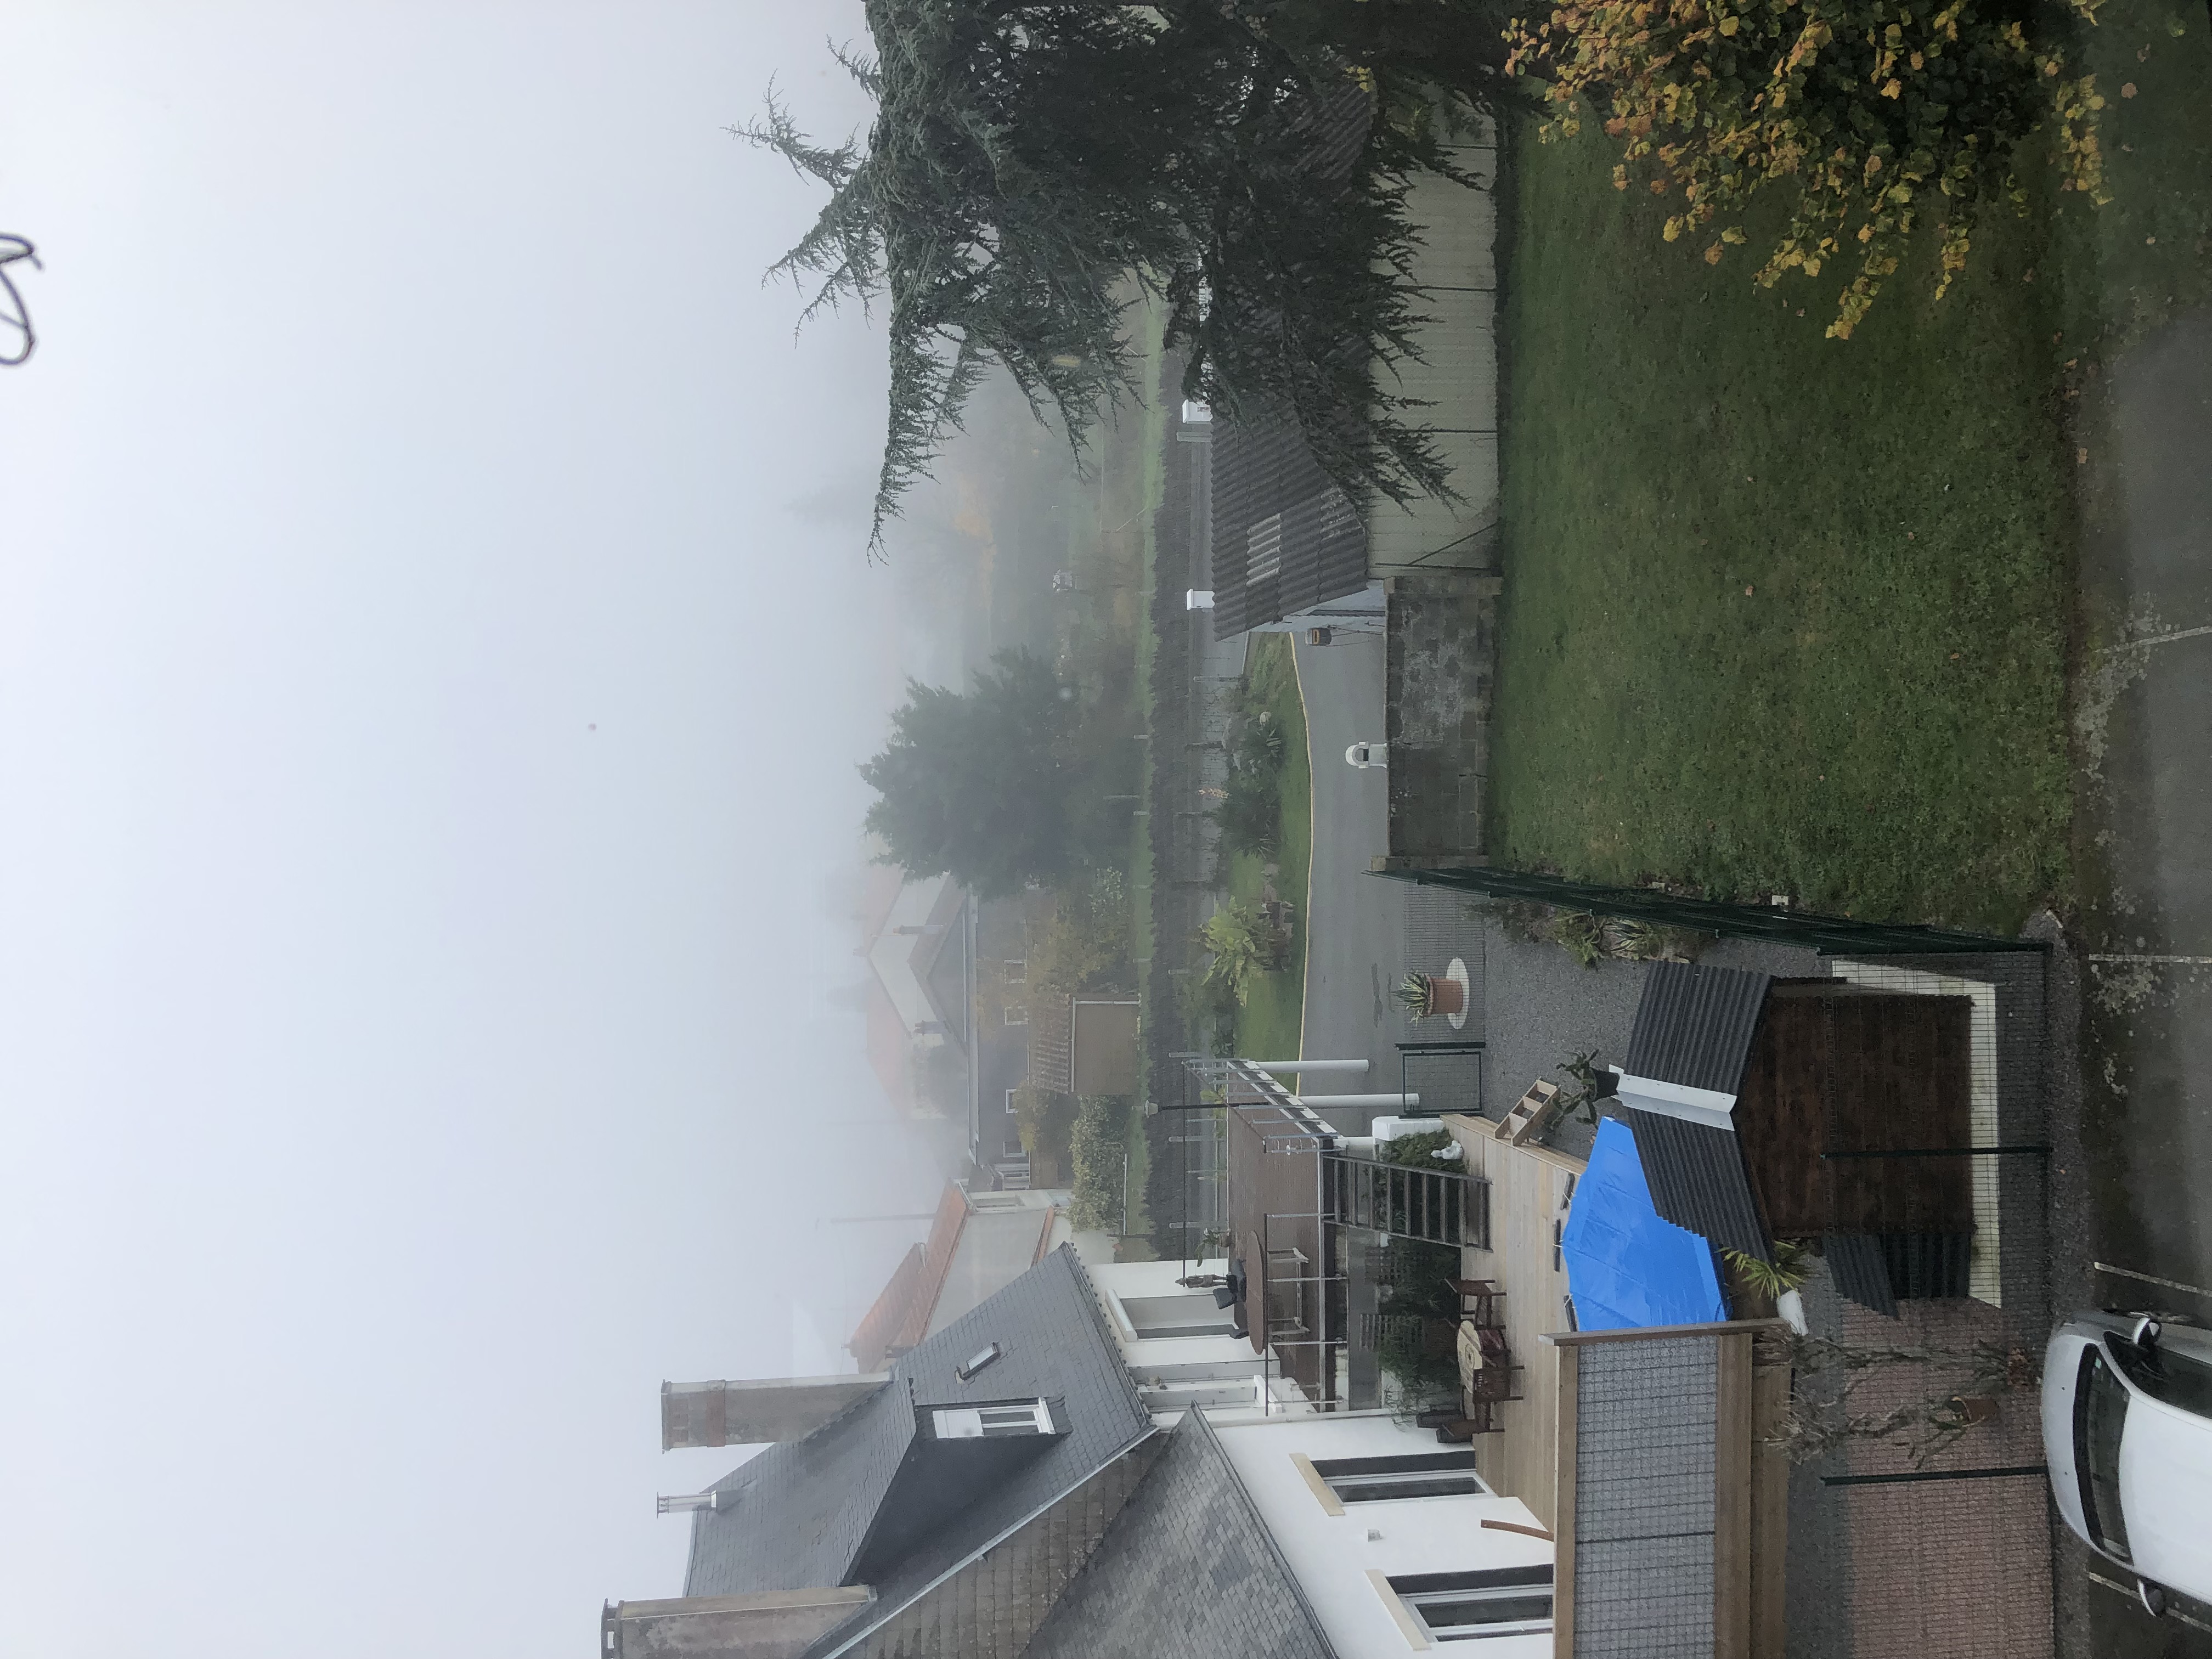 A foggy scene from Bressuire, France